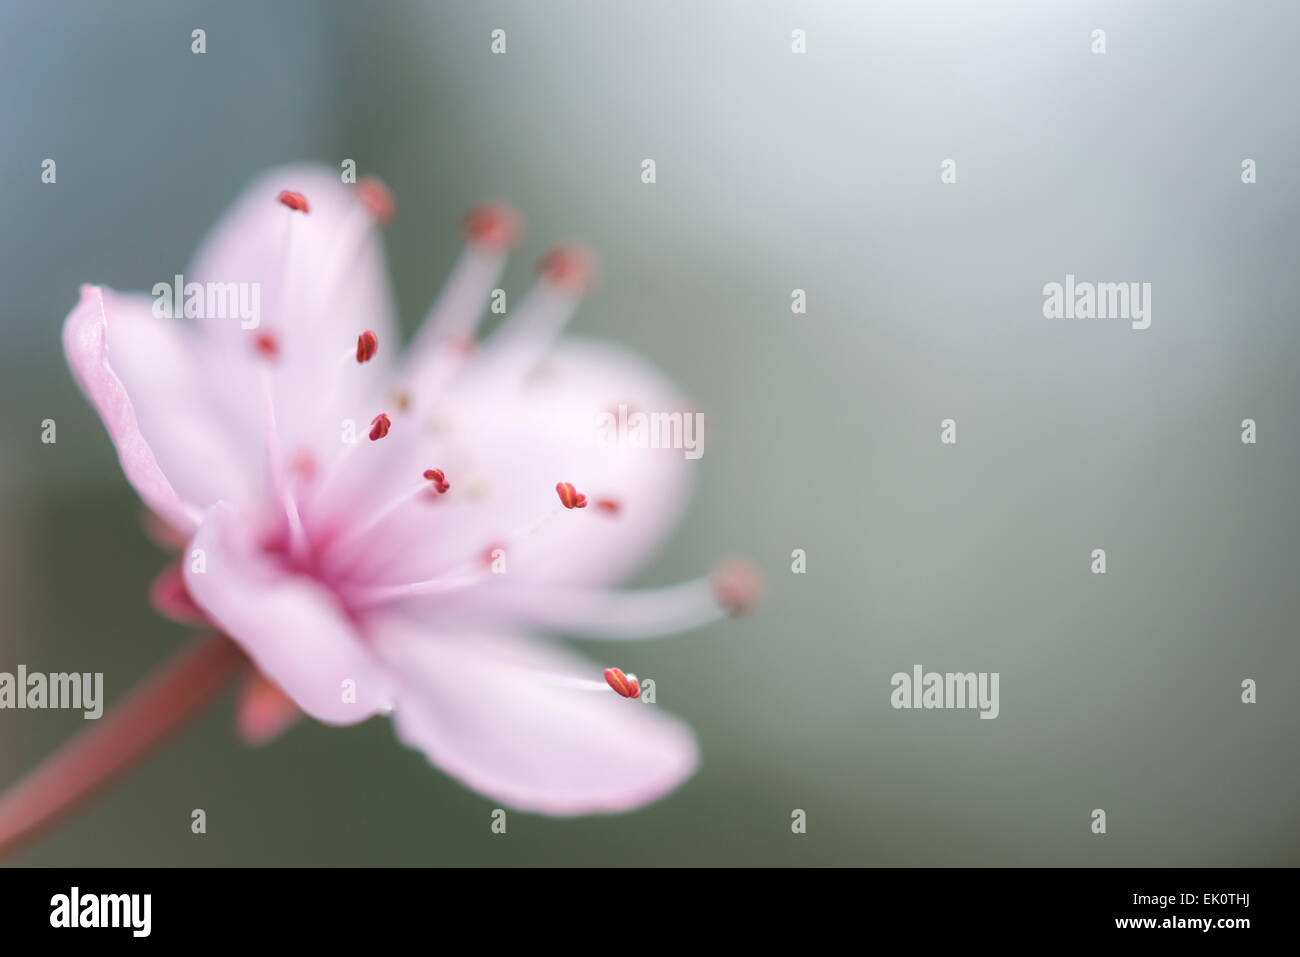 Soft pink blossom in close up with background blue. A single flower with tiny stamens. Stock Photo